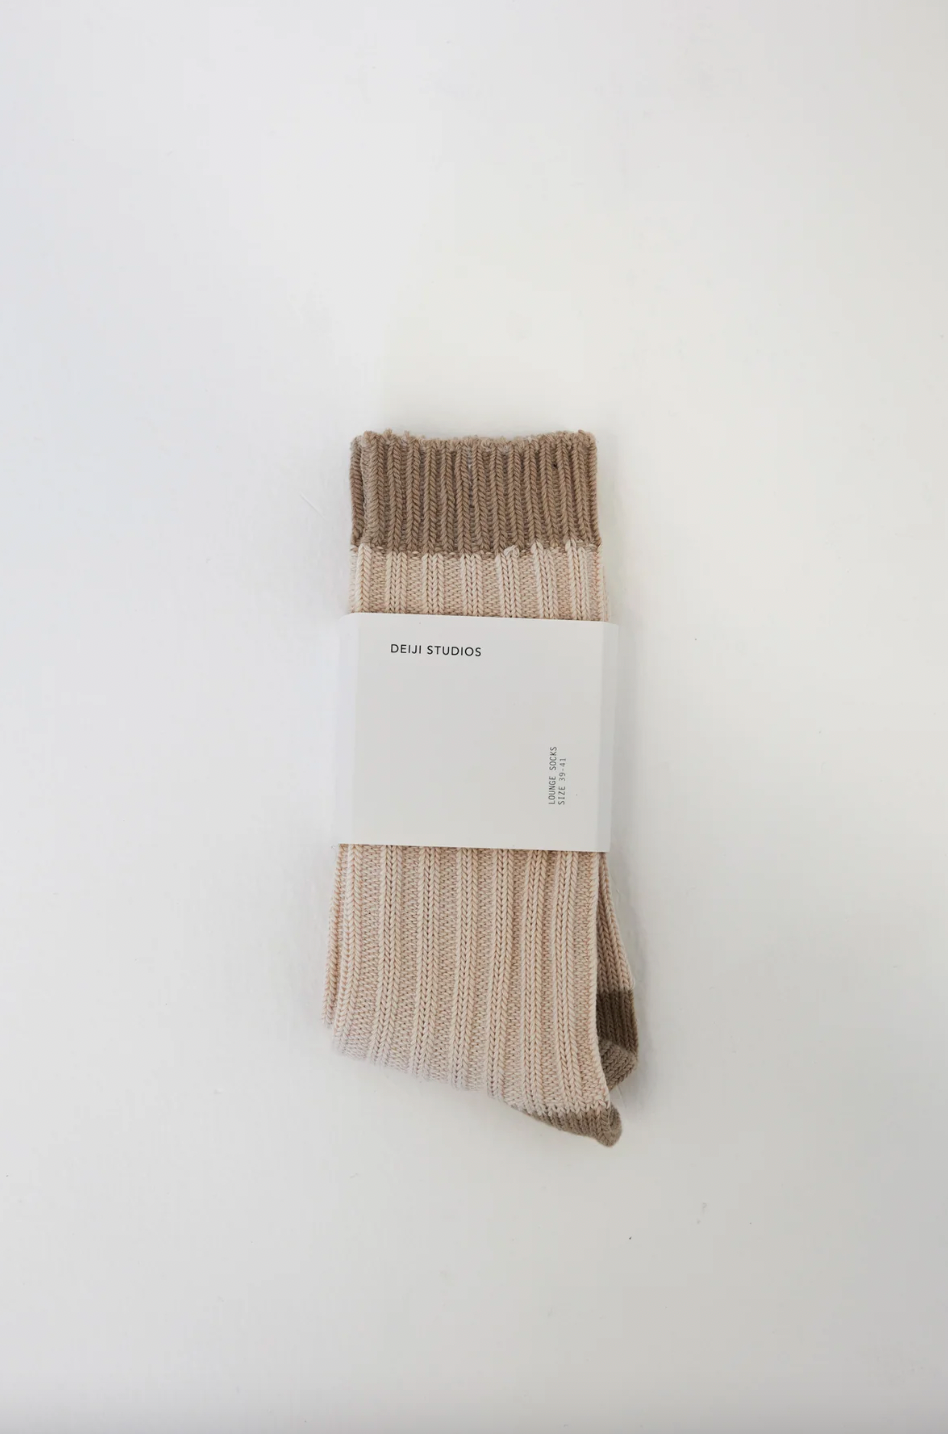 Product Image for The Woven Sock, Cream and Neutral